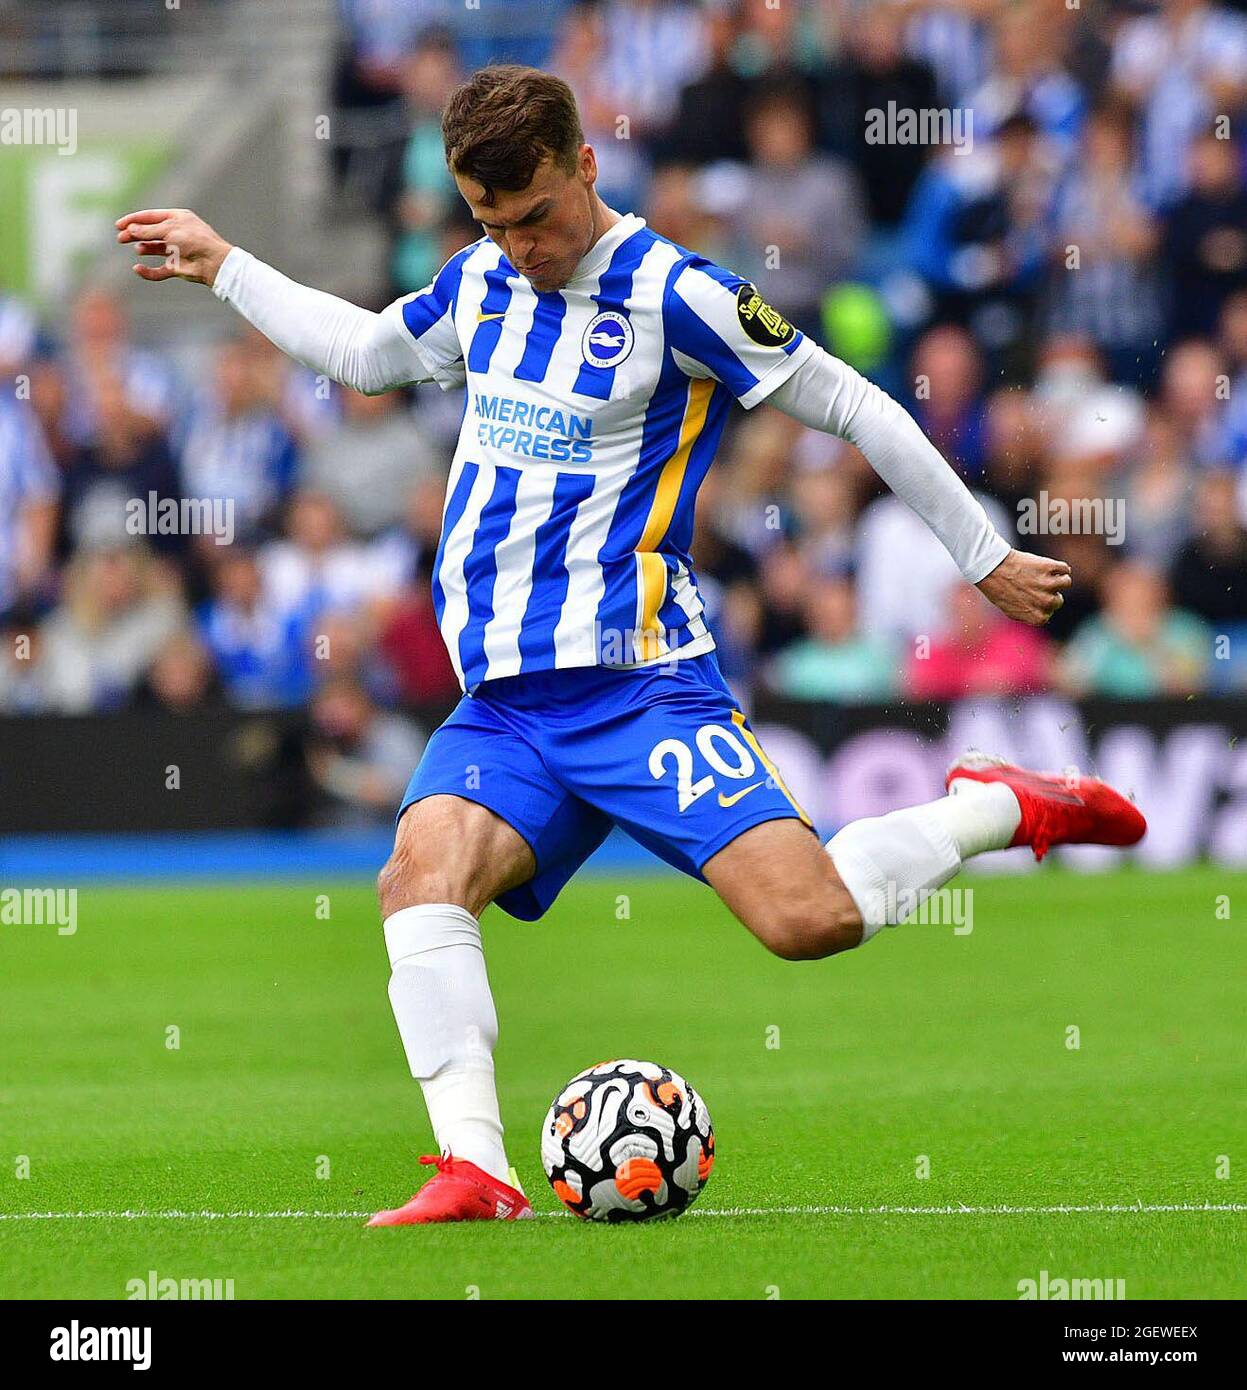 Brighton, UK. 21st Aug, 2021. Solly March of Brighton and Hove Albion makes a cross field pass during the Premier League match between Brighton & Hove Albion and Watford at The Amex on August 21st 2021 in Brighton, England. (Photo by Jeff Mood/phcimages.com) Credit: PHC Images/Alamy Live News Stock Photo